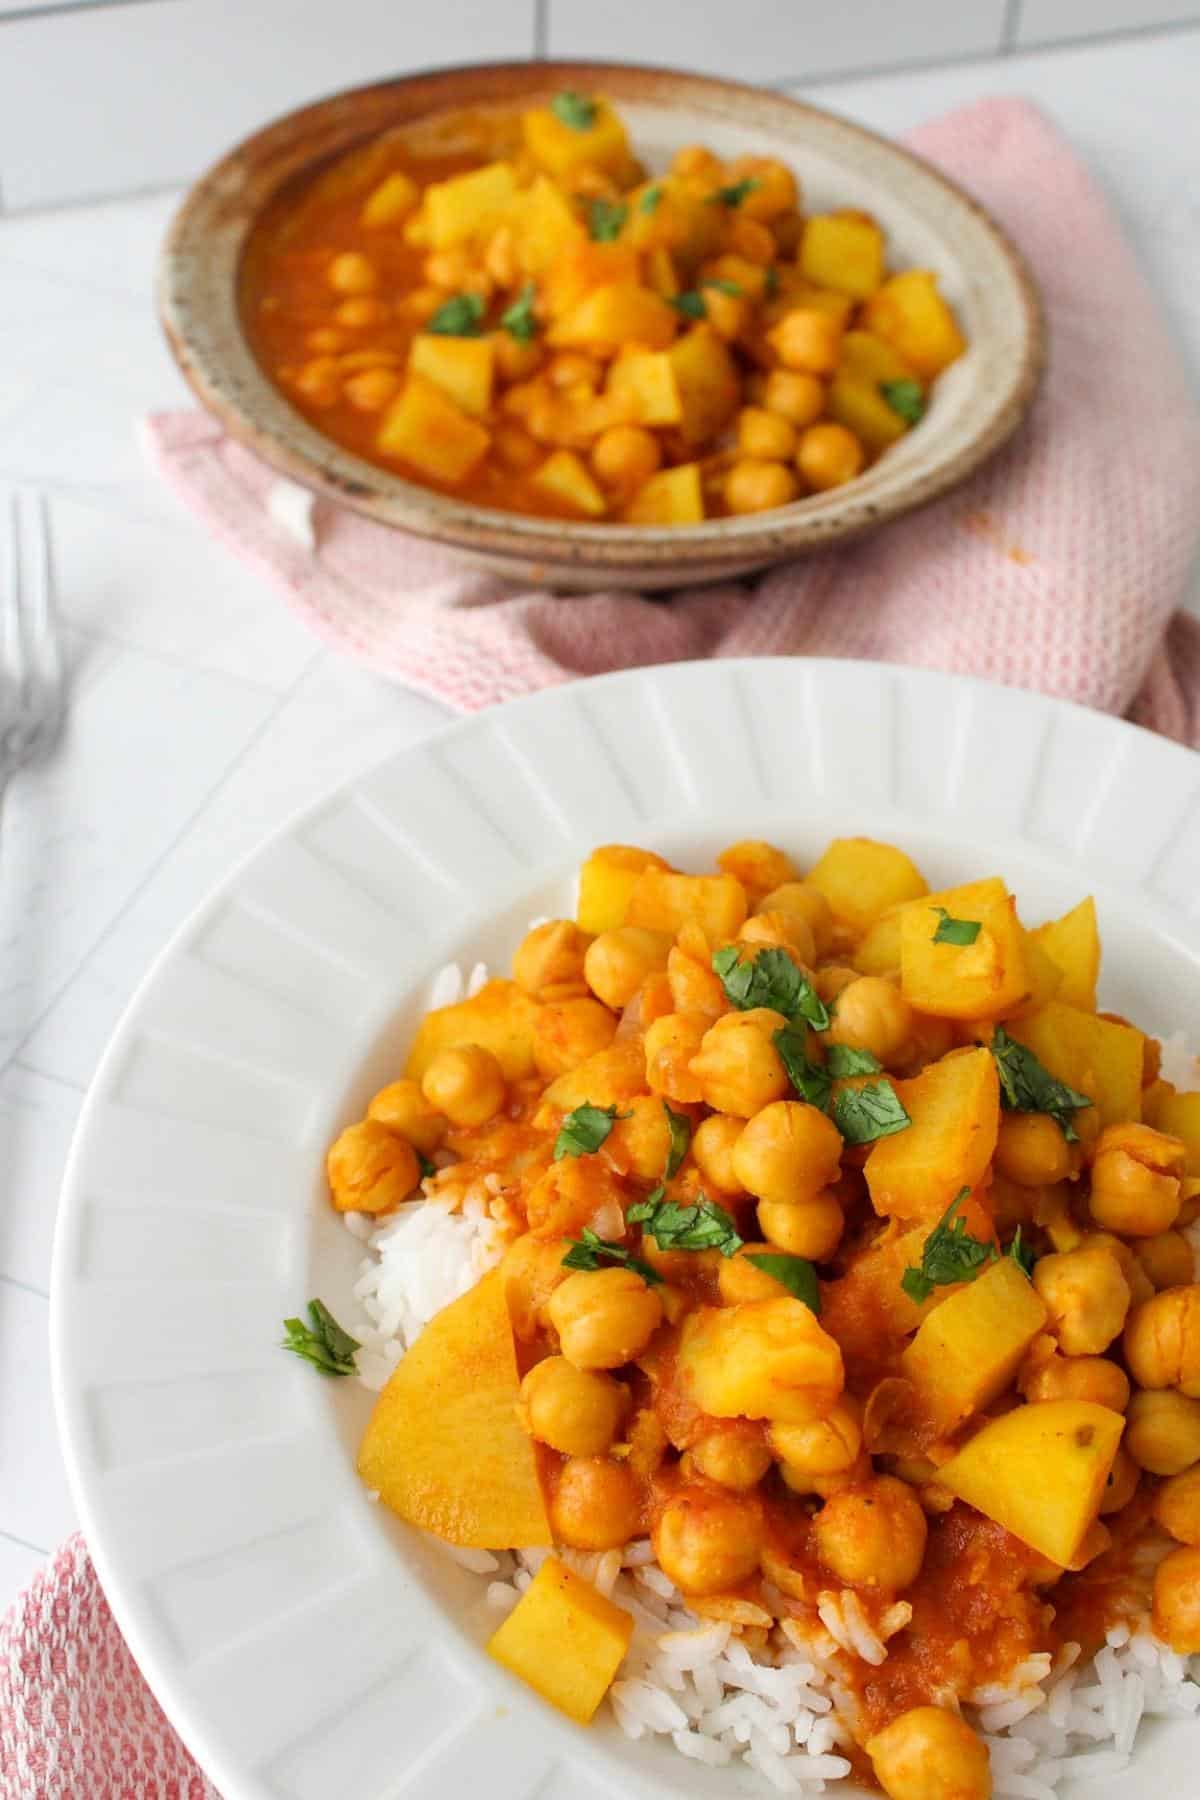 Chickpea and potato curry in a bowl served over rice.